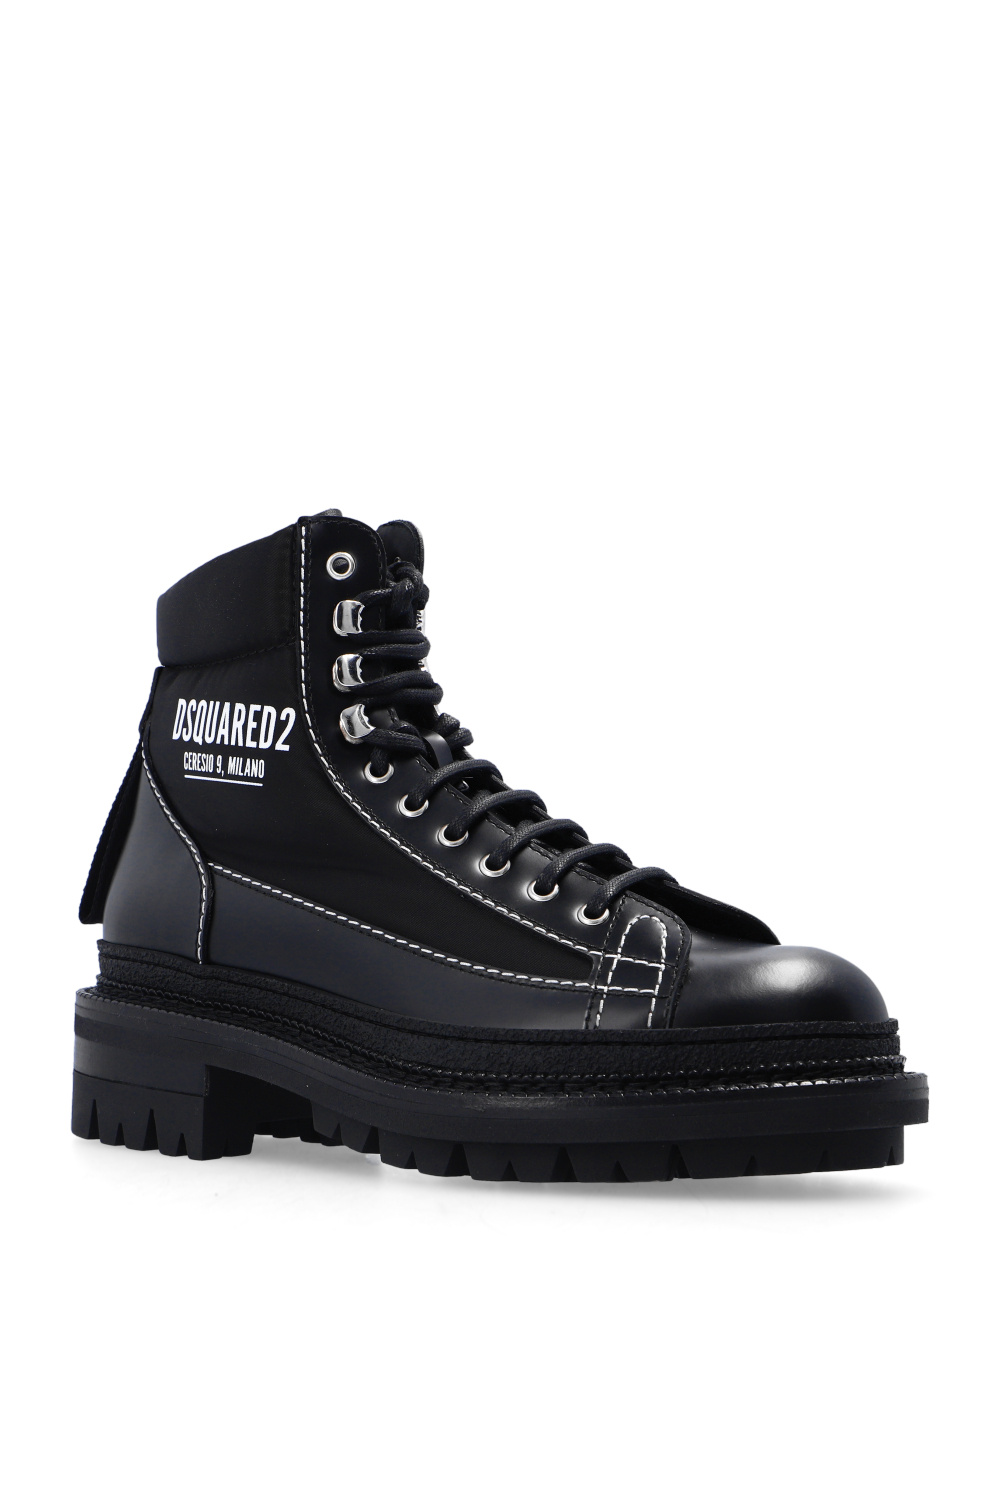 Dsquared2 Best rated Black Diamond converse shoes